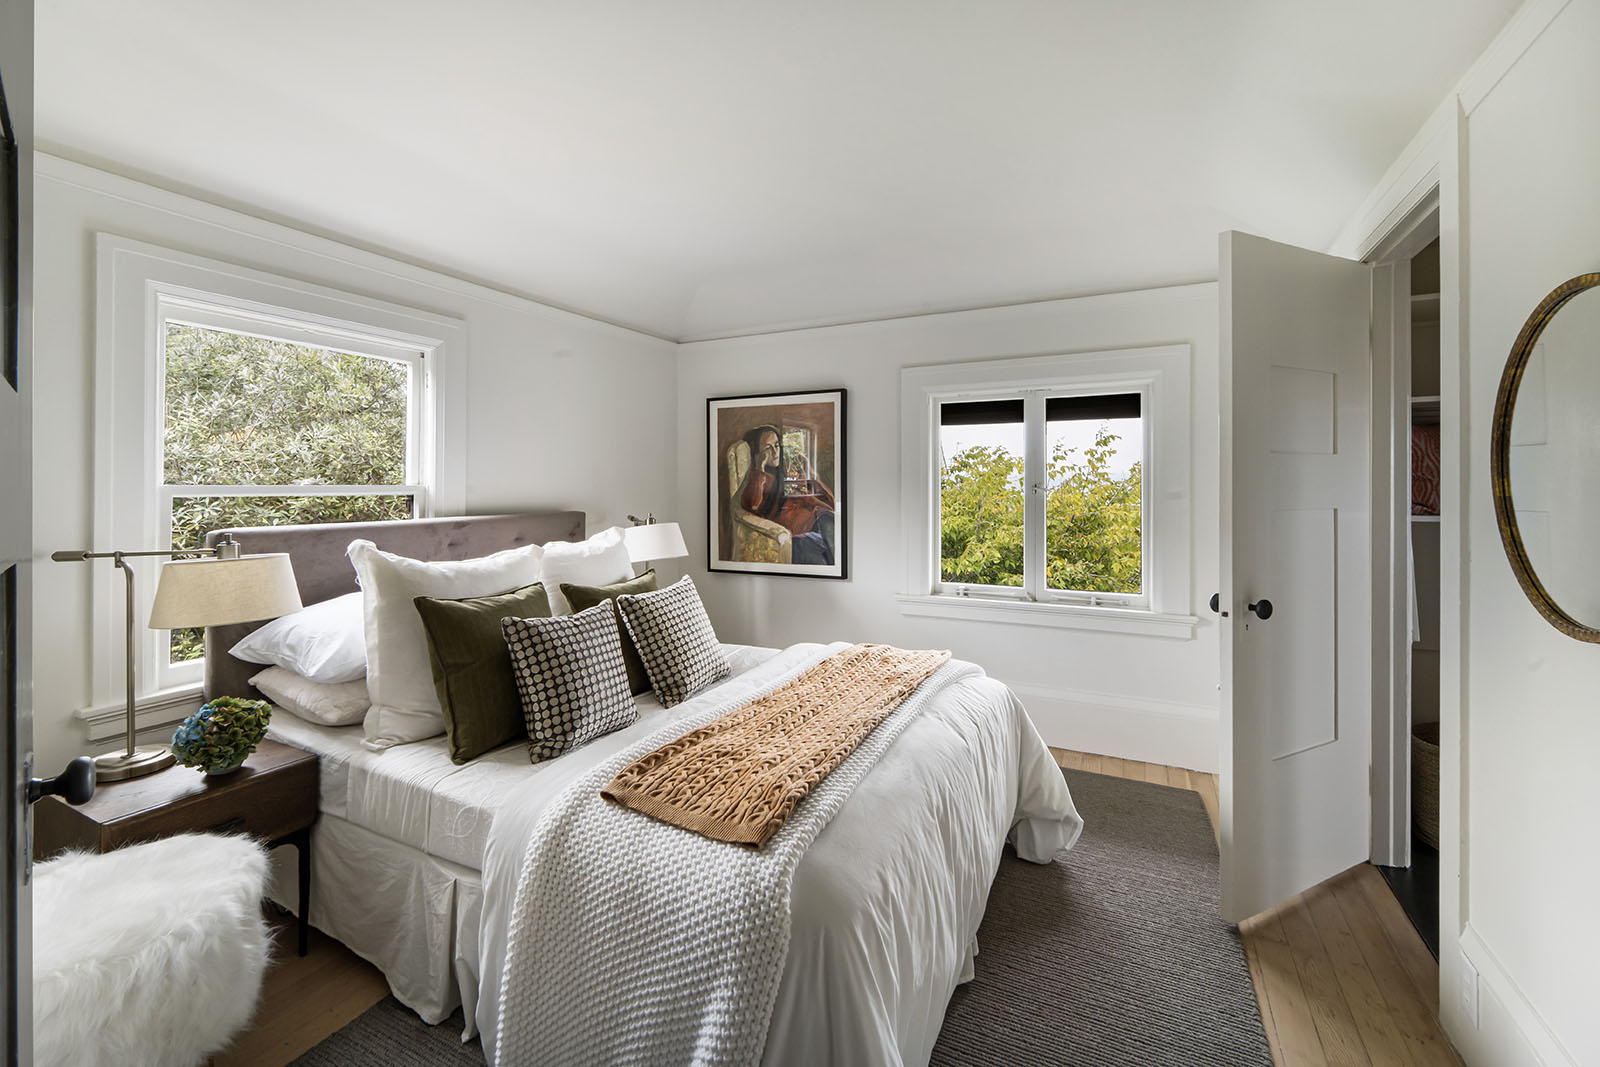 A second of three bedrooms in the Ansel Adams Estate.